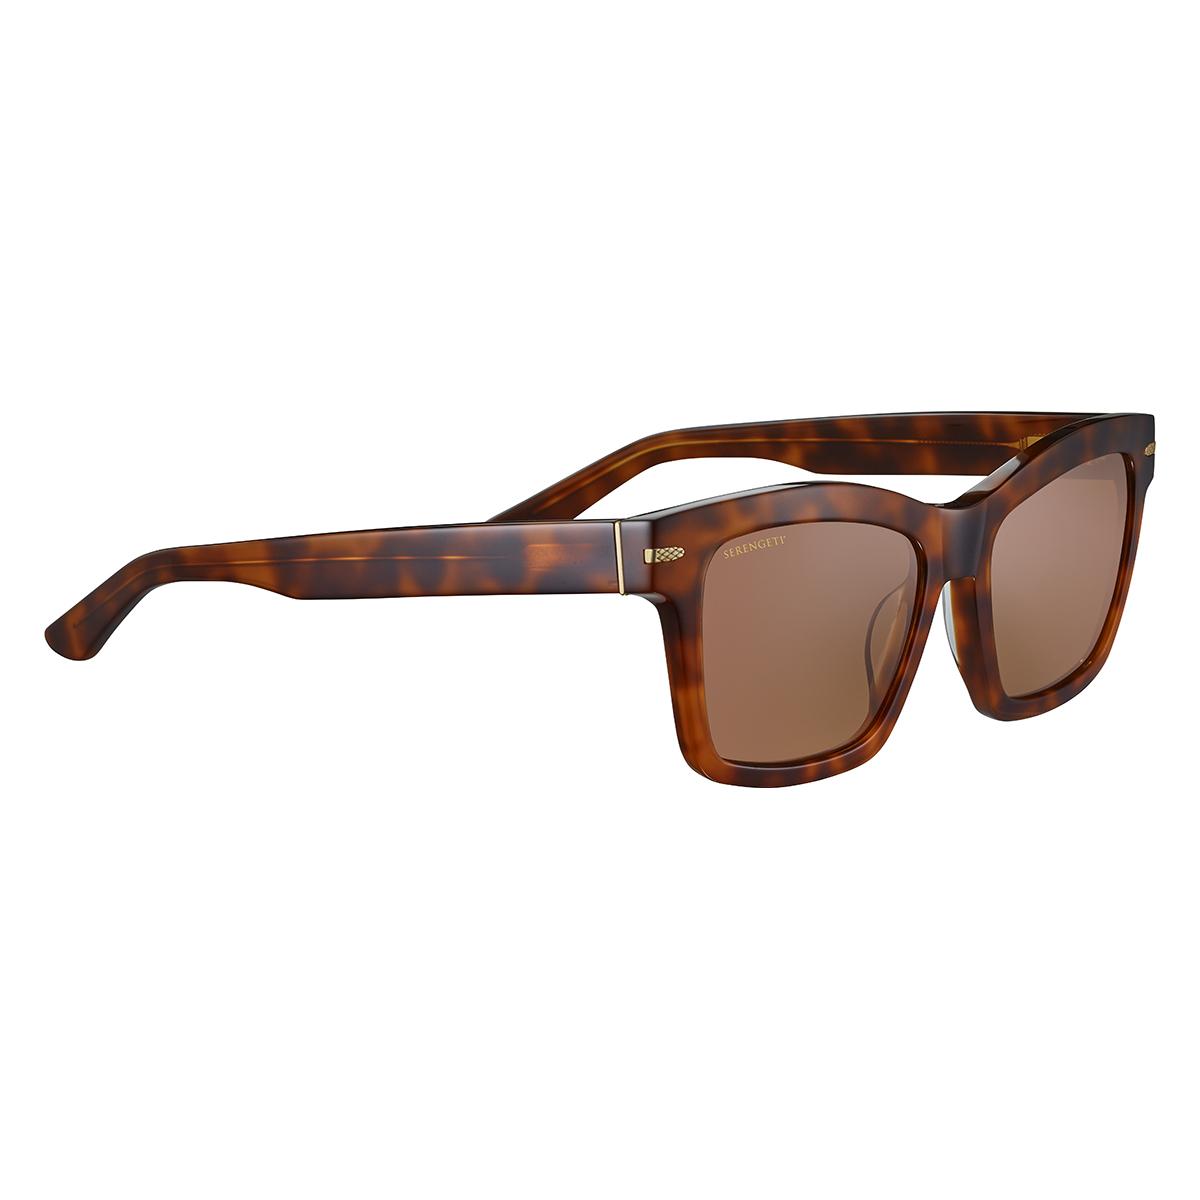 Color_SS528005 - Shiny Classic Havana - Mineral Polarized Drivers Cat 2 to 3